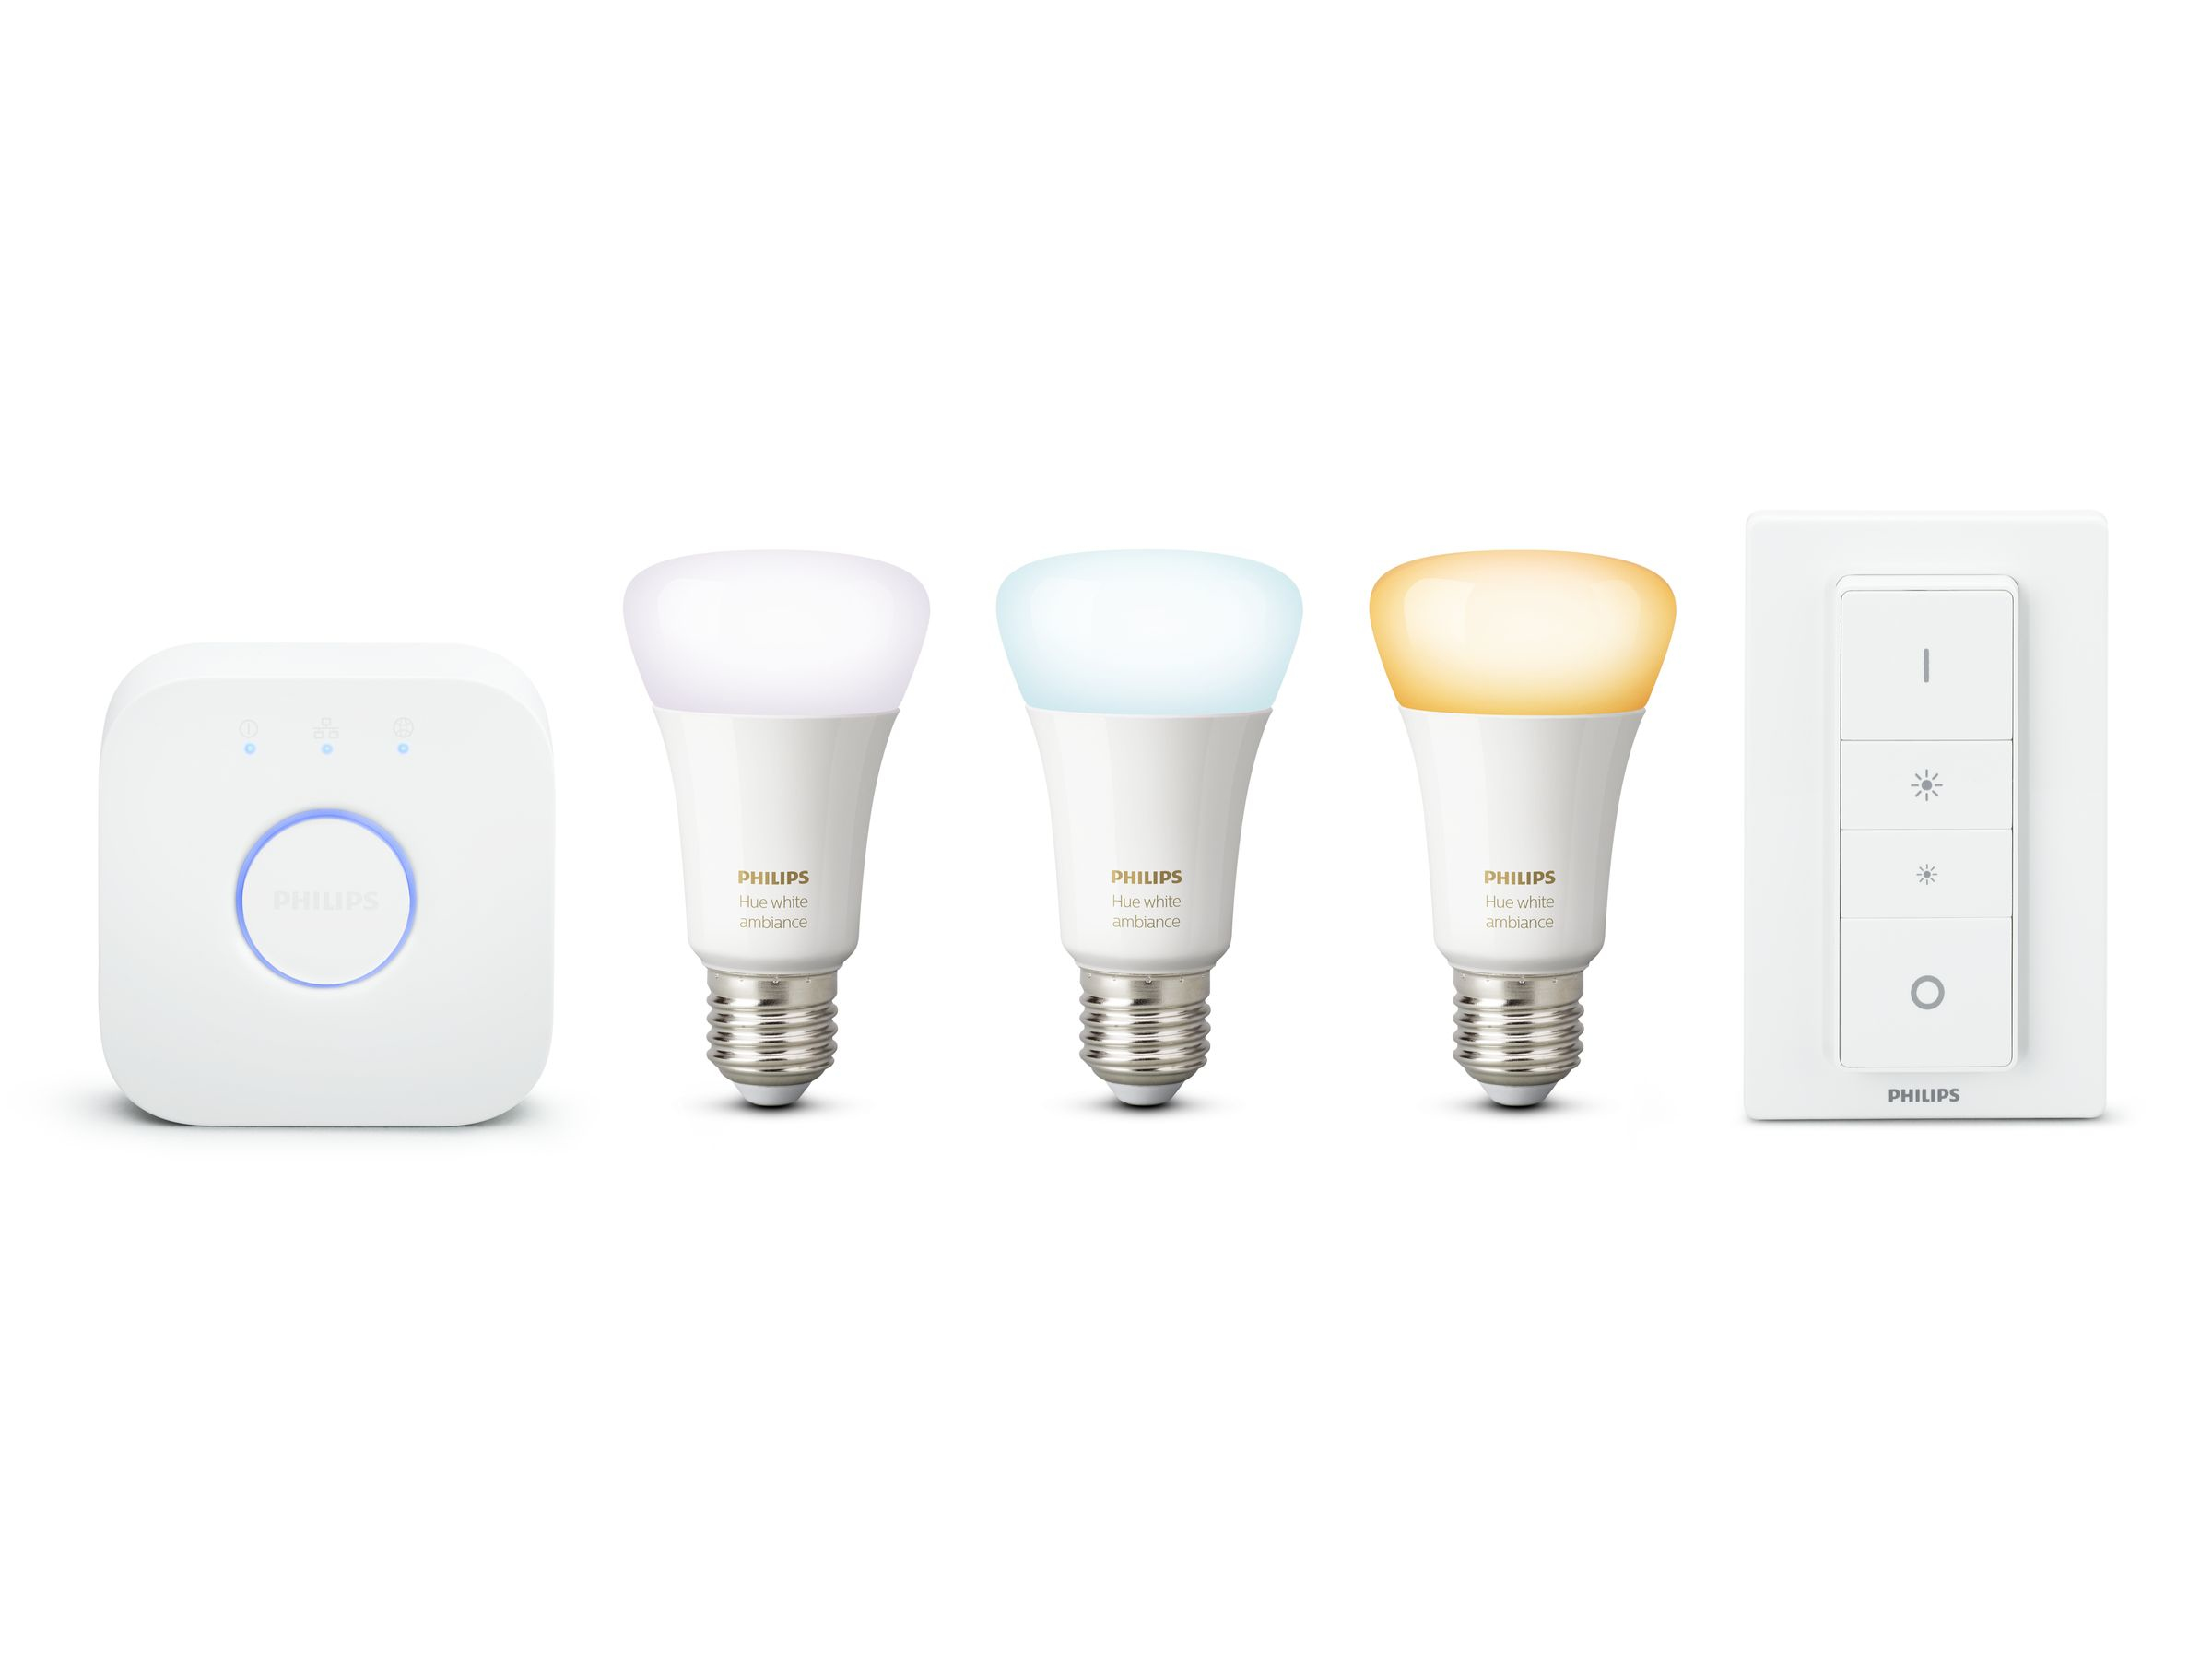 Philips Hue 9.5W E27 LED 3 Starter Set with Dimmer Switch